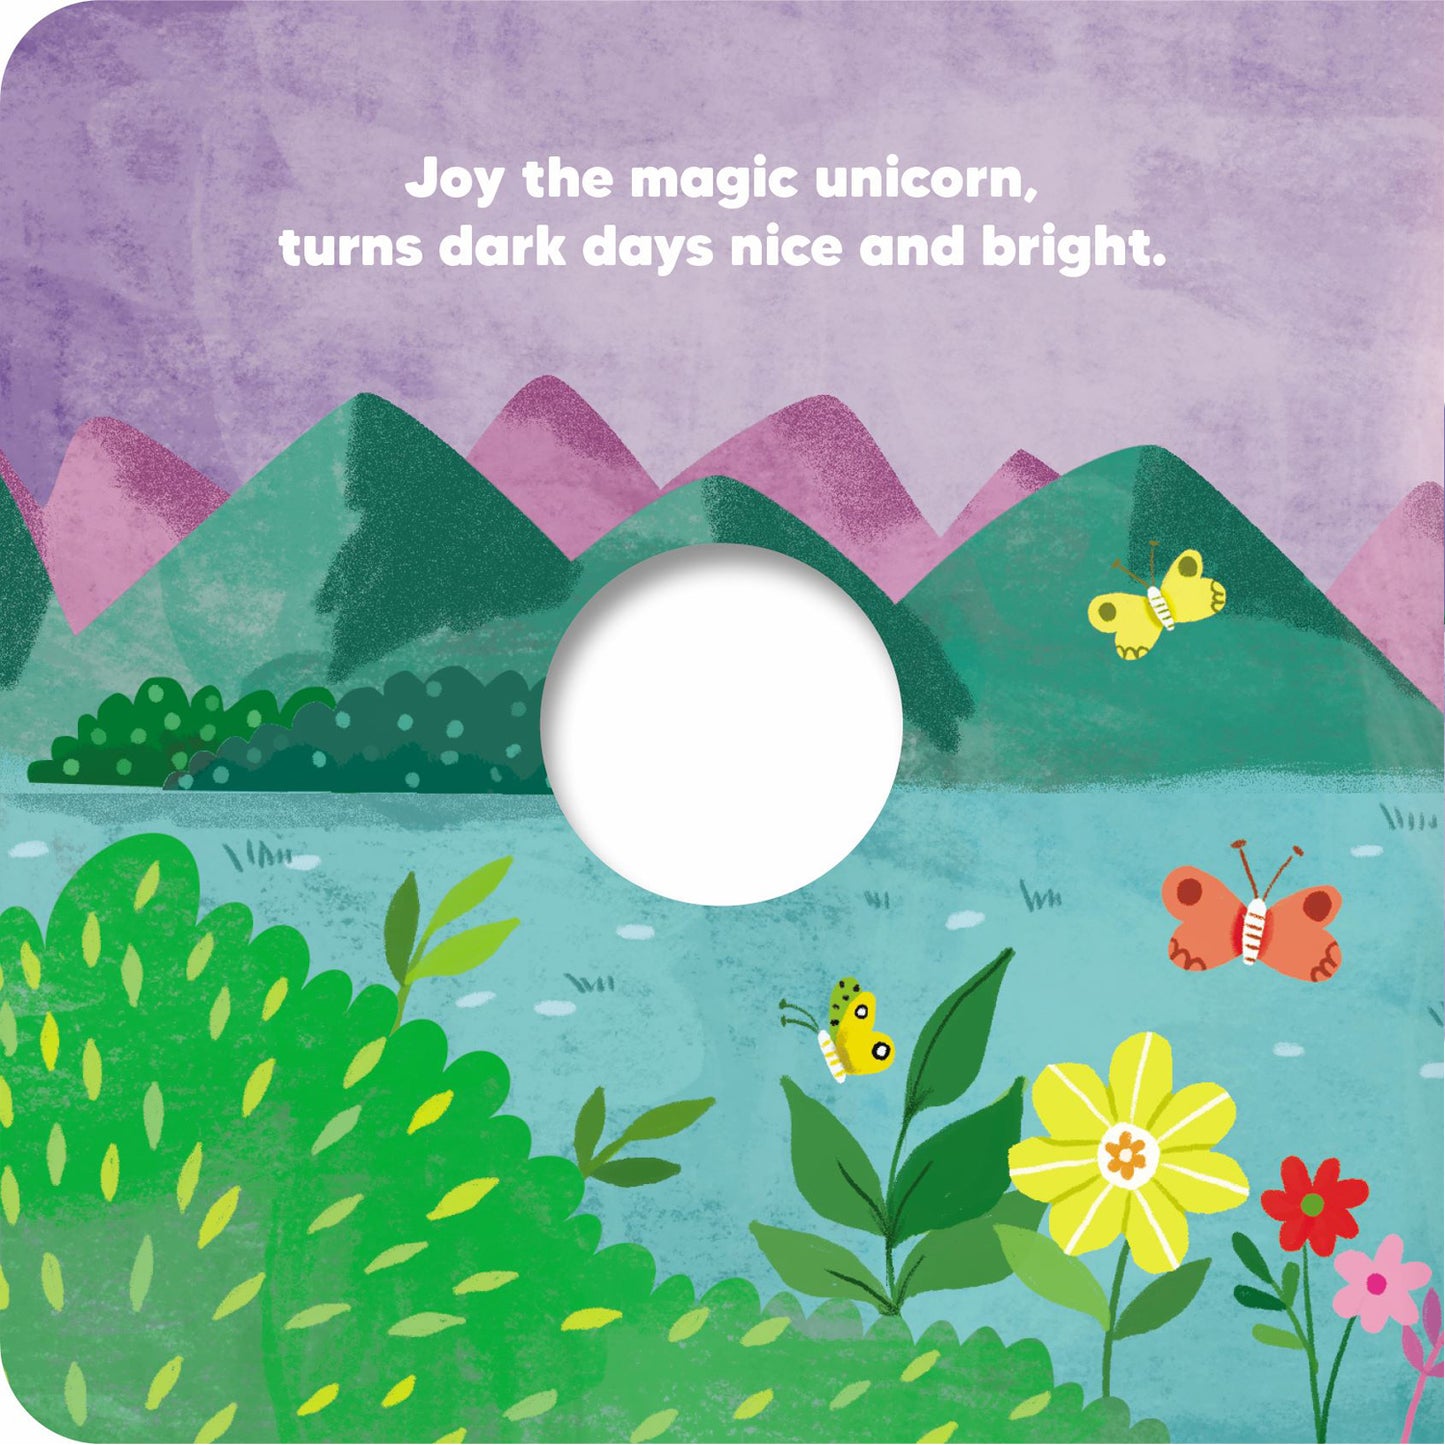 Finger Puppet Book - Magical Unicorn Puppet as She Uses Her Magical Power to Help Others